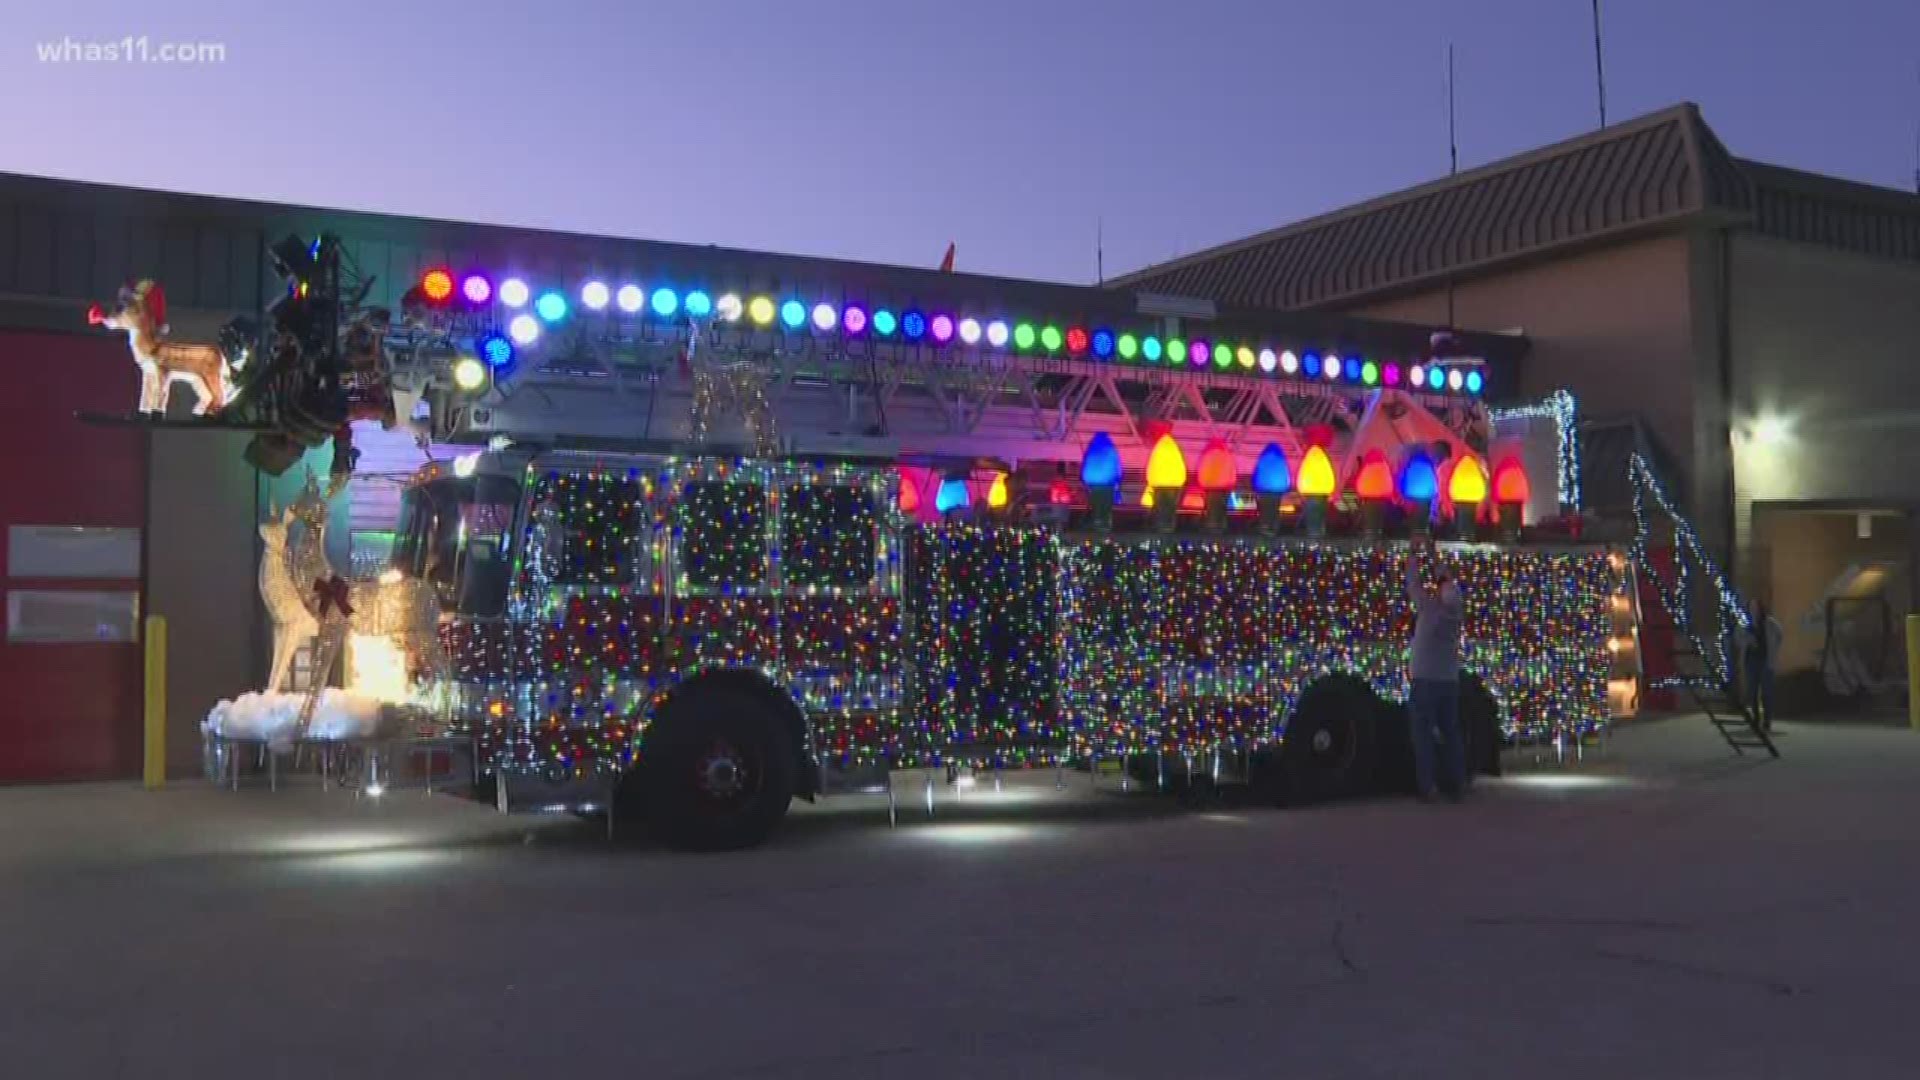 Over the next few weeks, Santa will ride the truck to local neighborhoods to visit with children.